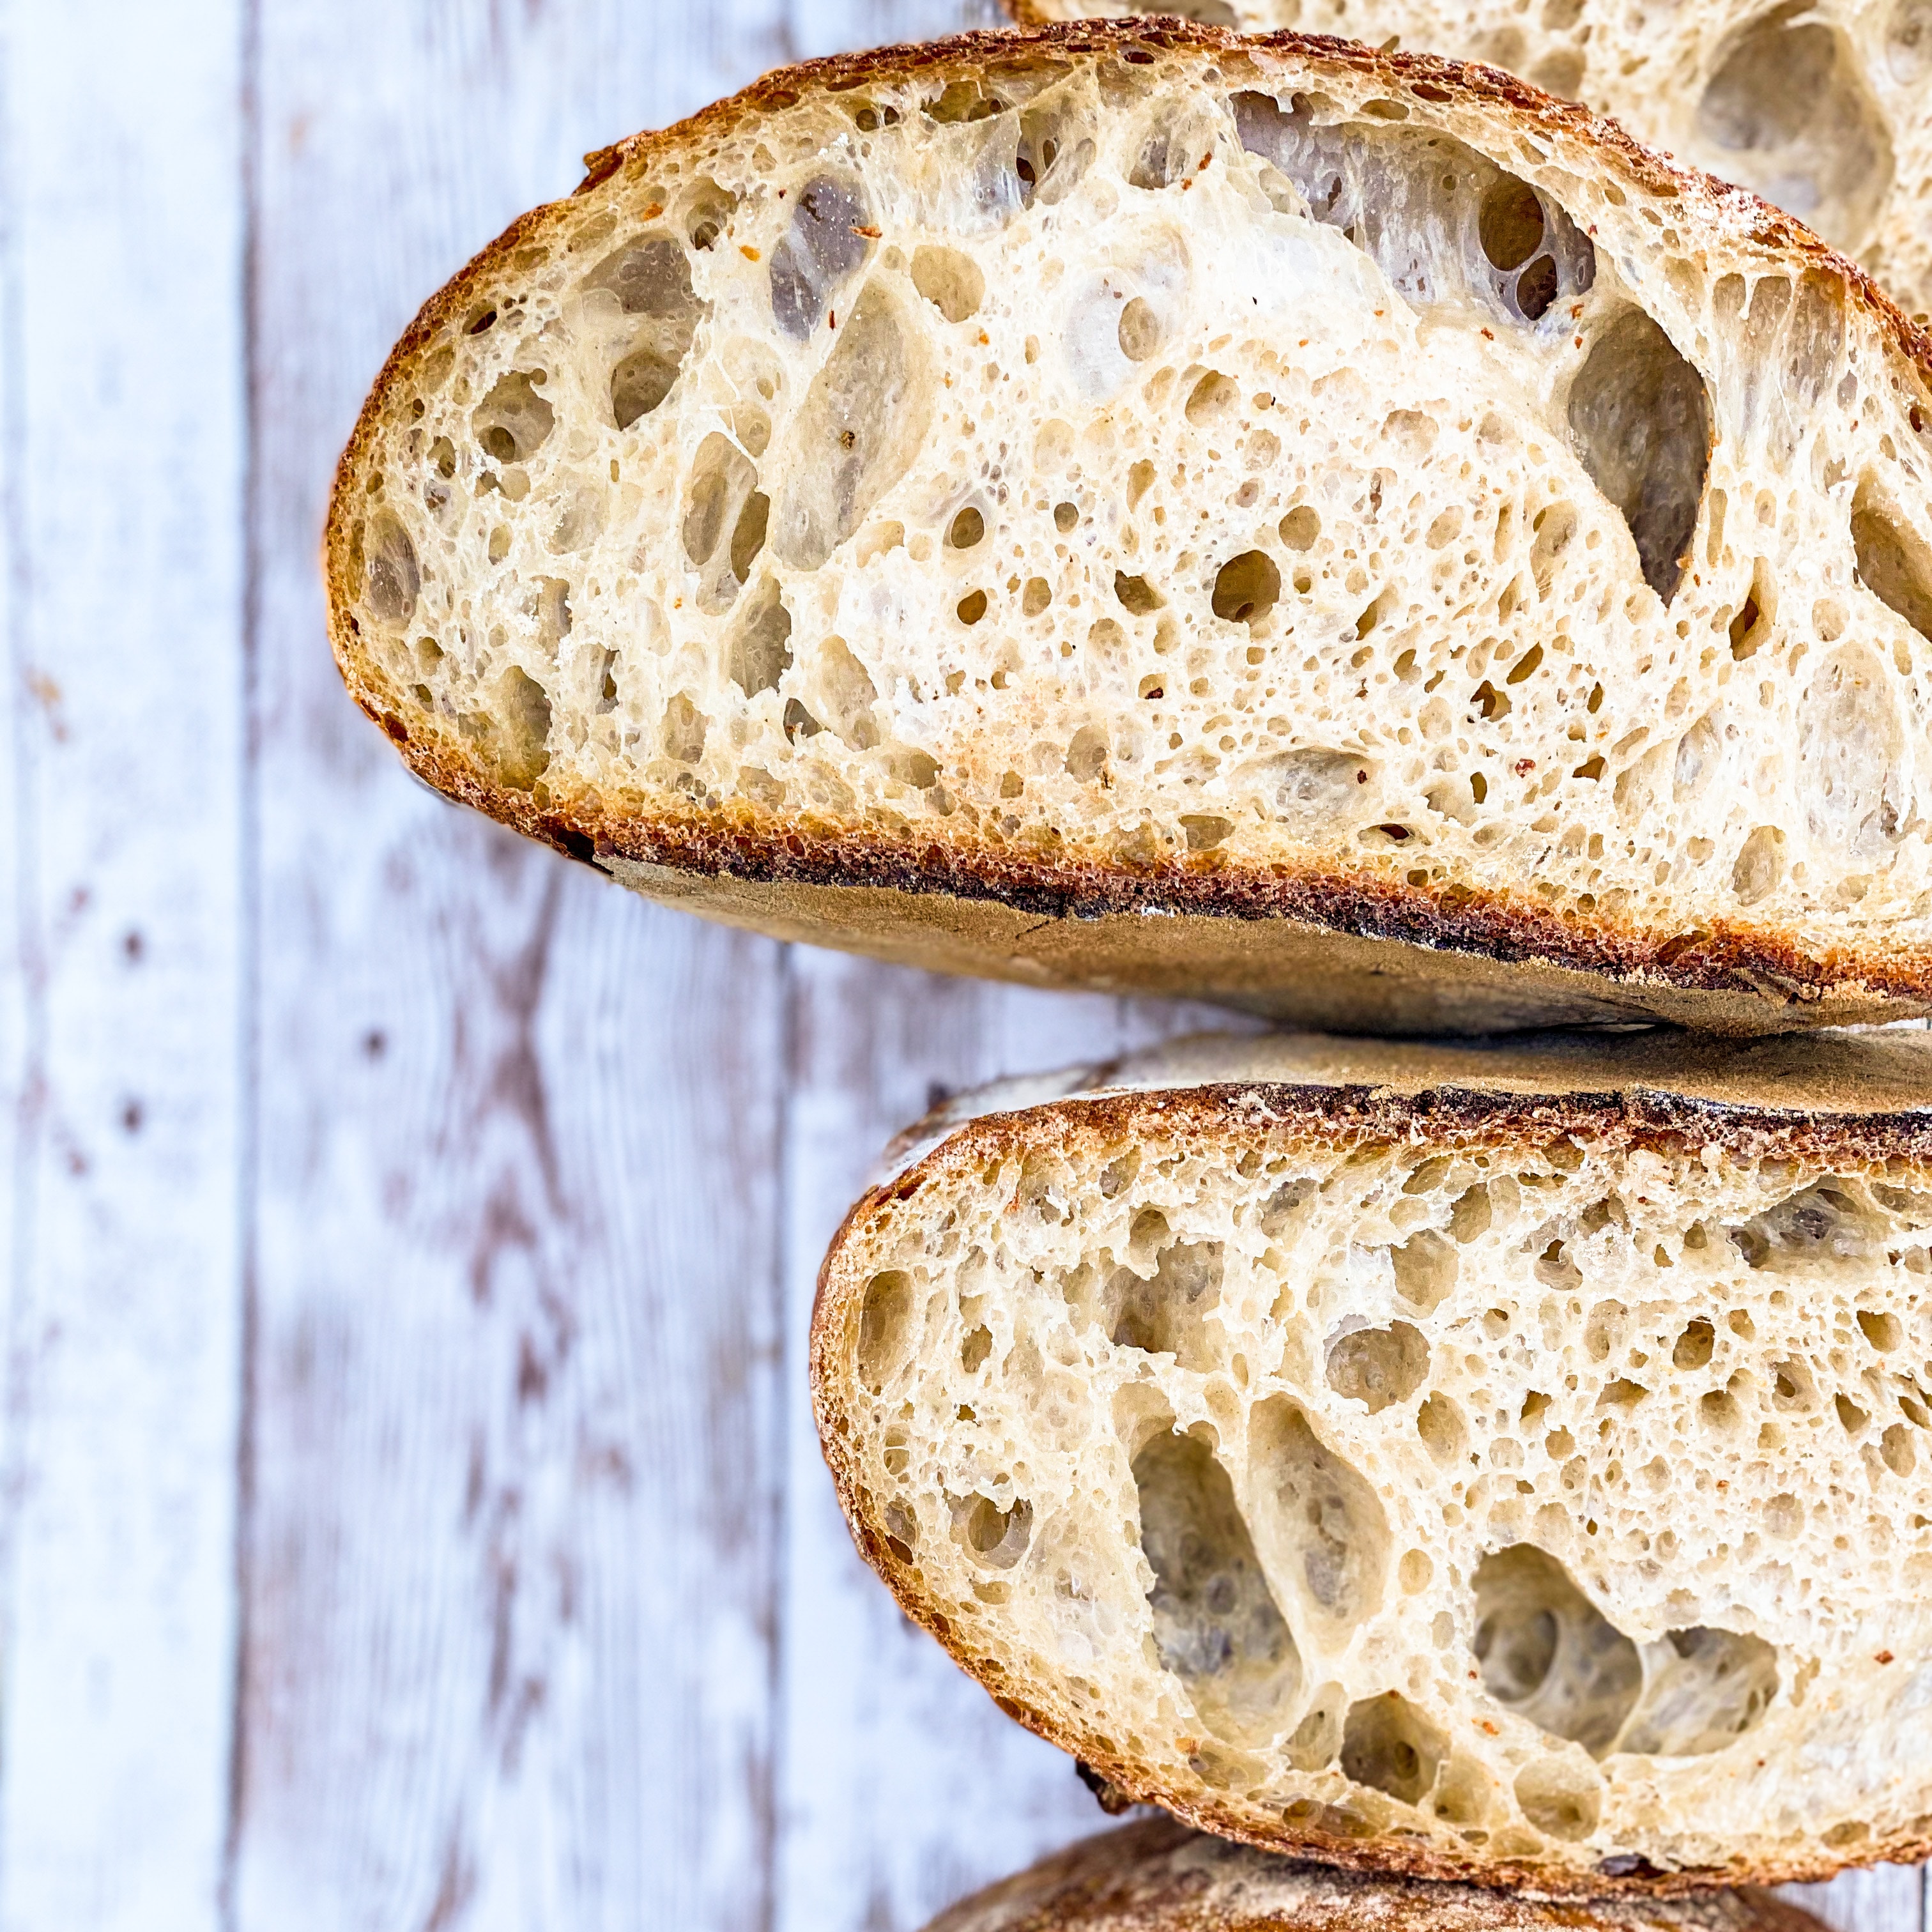 Avoid Failure: How to Bake Sourdough in Hot & Humid Climates